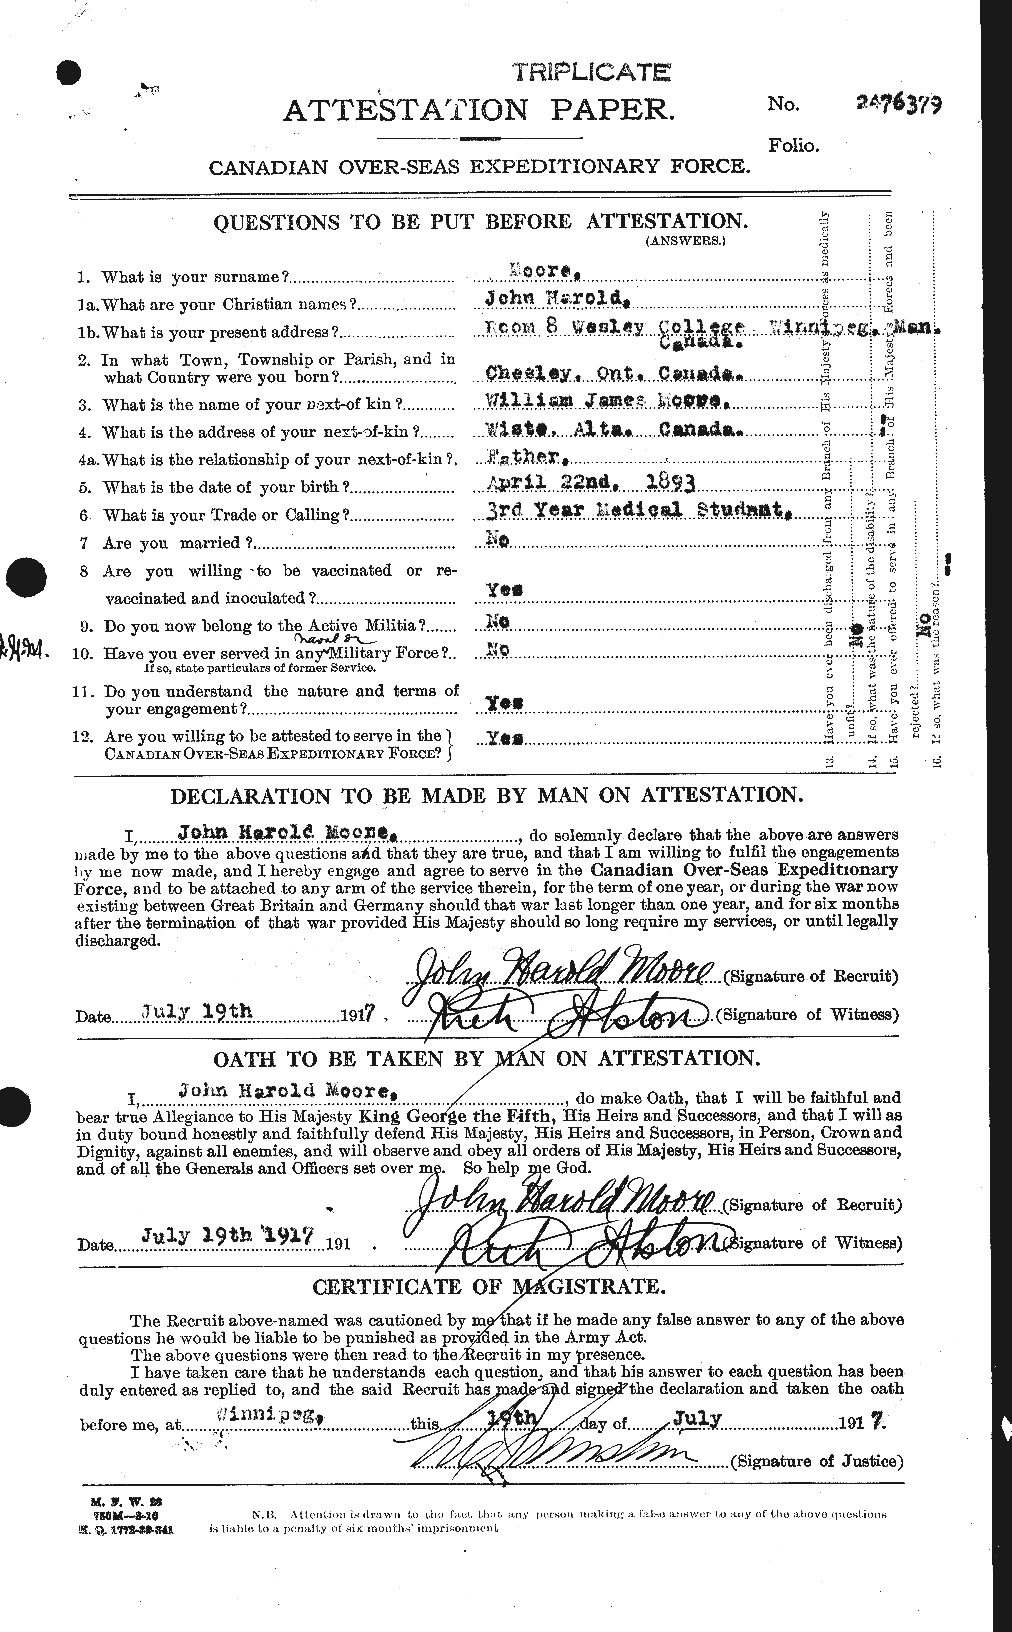 Personnel Records of the First World War - CEF 503295a